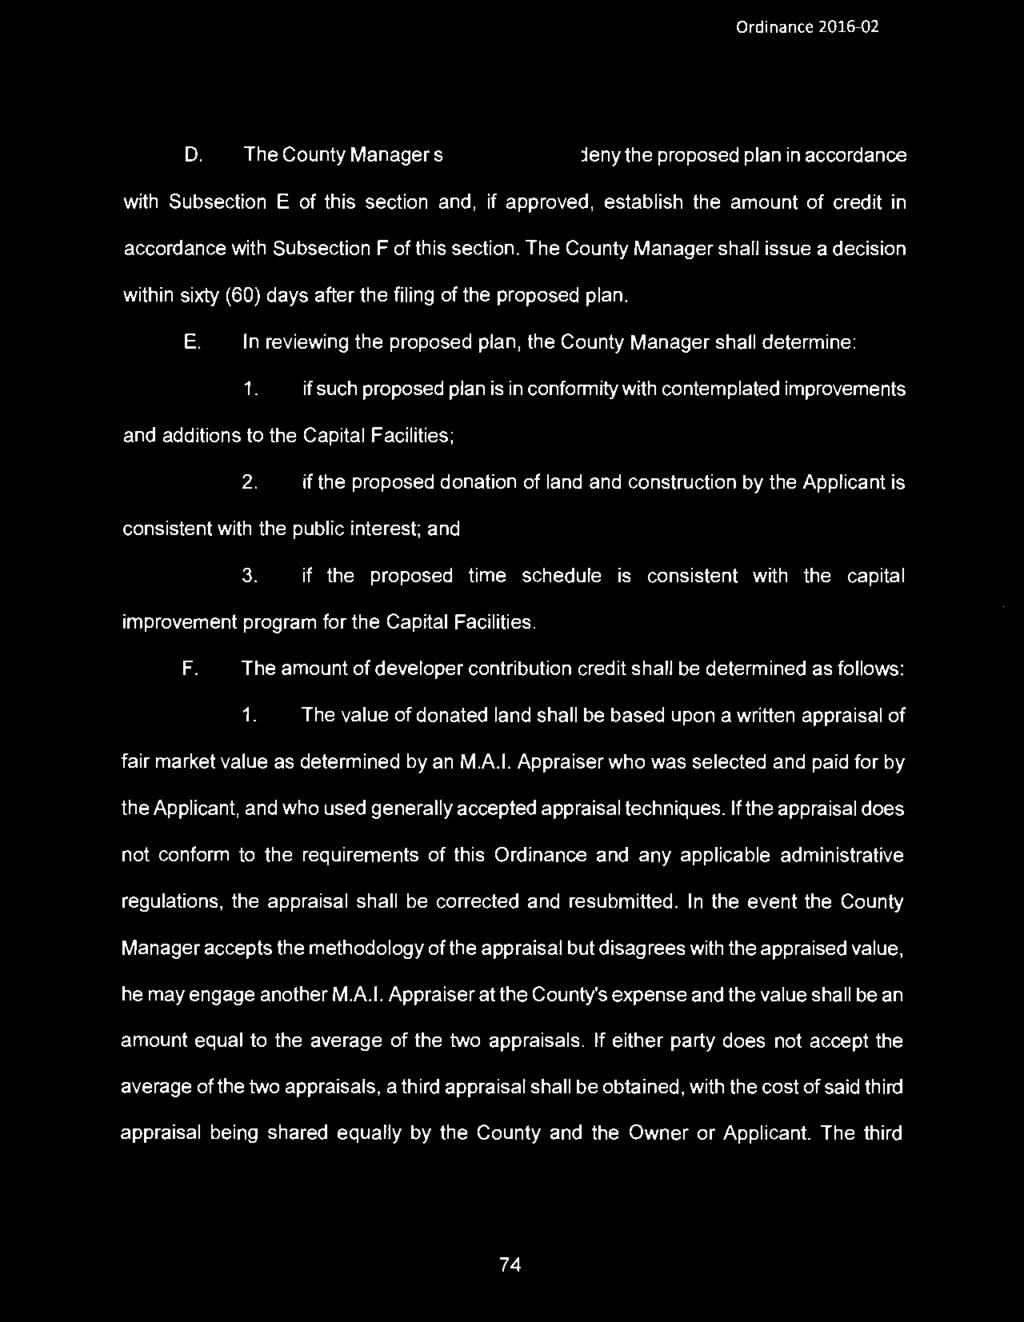 D. The County Manager shall approve or deny the proposed plan in accordance with Subsection E of this section and, if approved, establish the amount of credit in accordance with Subsection F of this